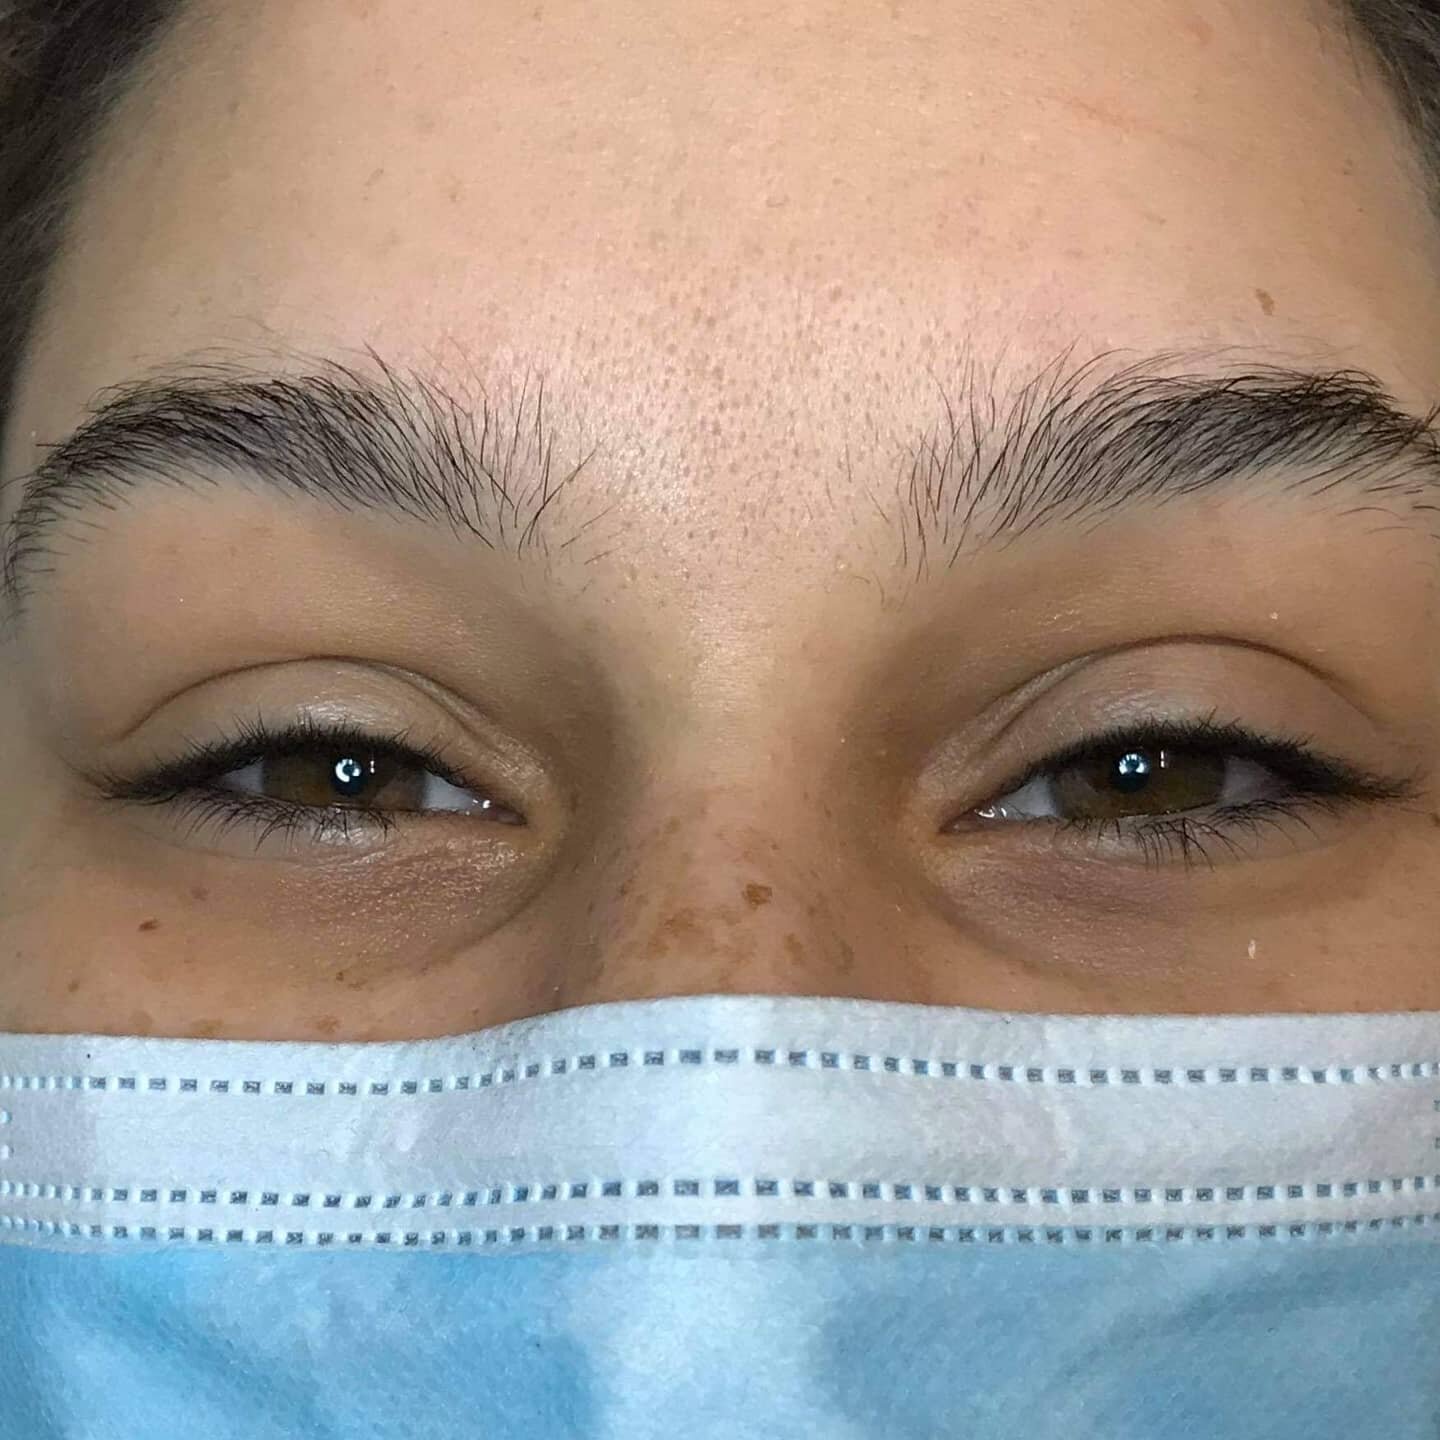 💥💥💥LASH LIFT ALERT!💥💥💥

Have you ever had one? Thought about trying one? 

Currently our eyes are all anyone can see with wearing these masks! So make them eyes pop and treat yourself!

Only takes about an hour and we recommend a tint so you do